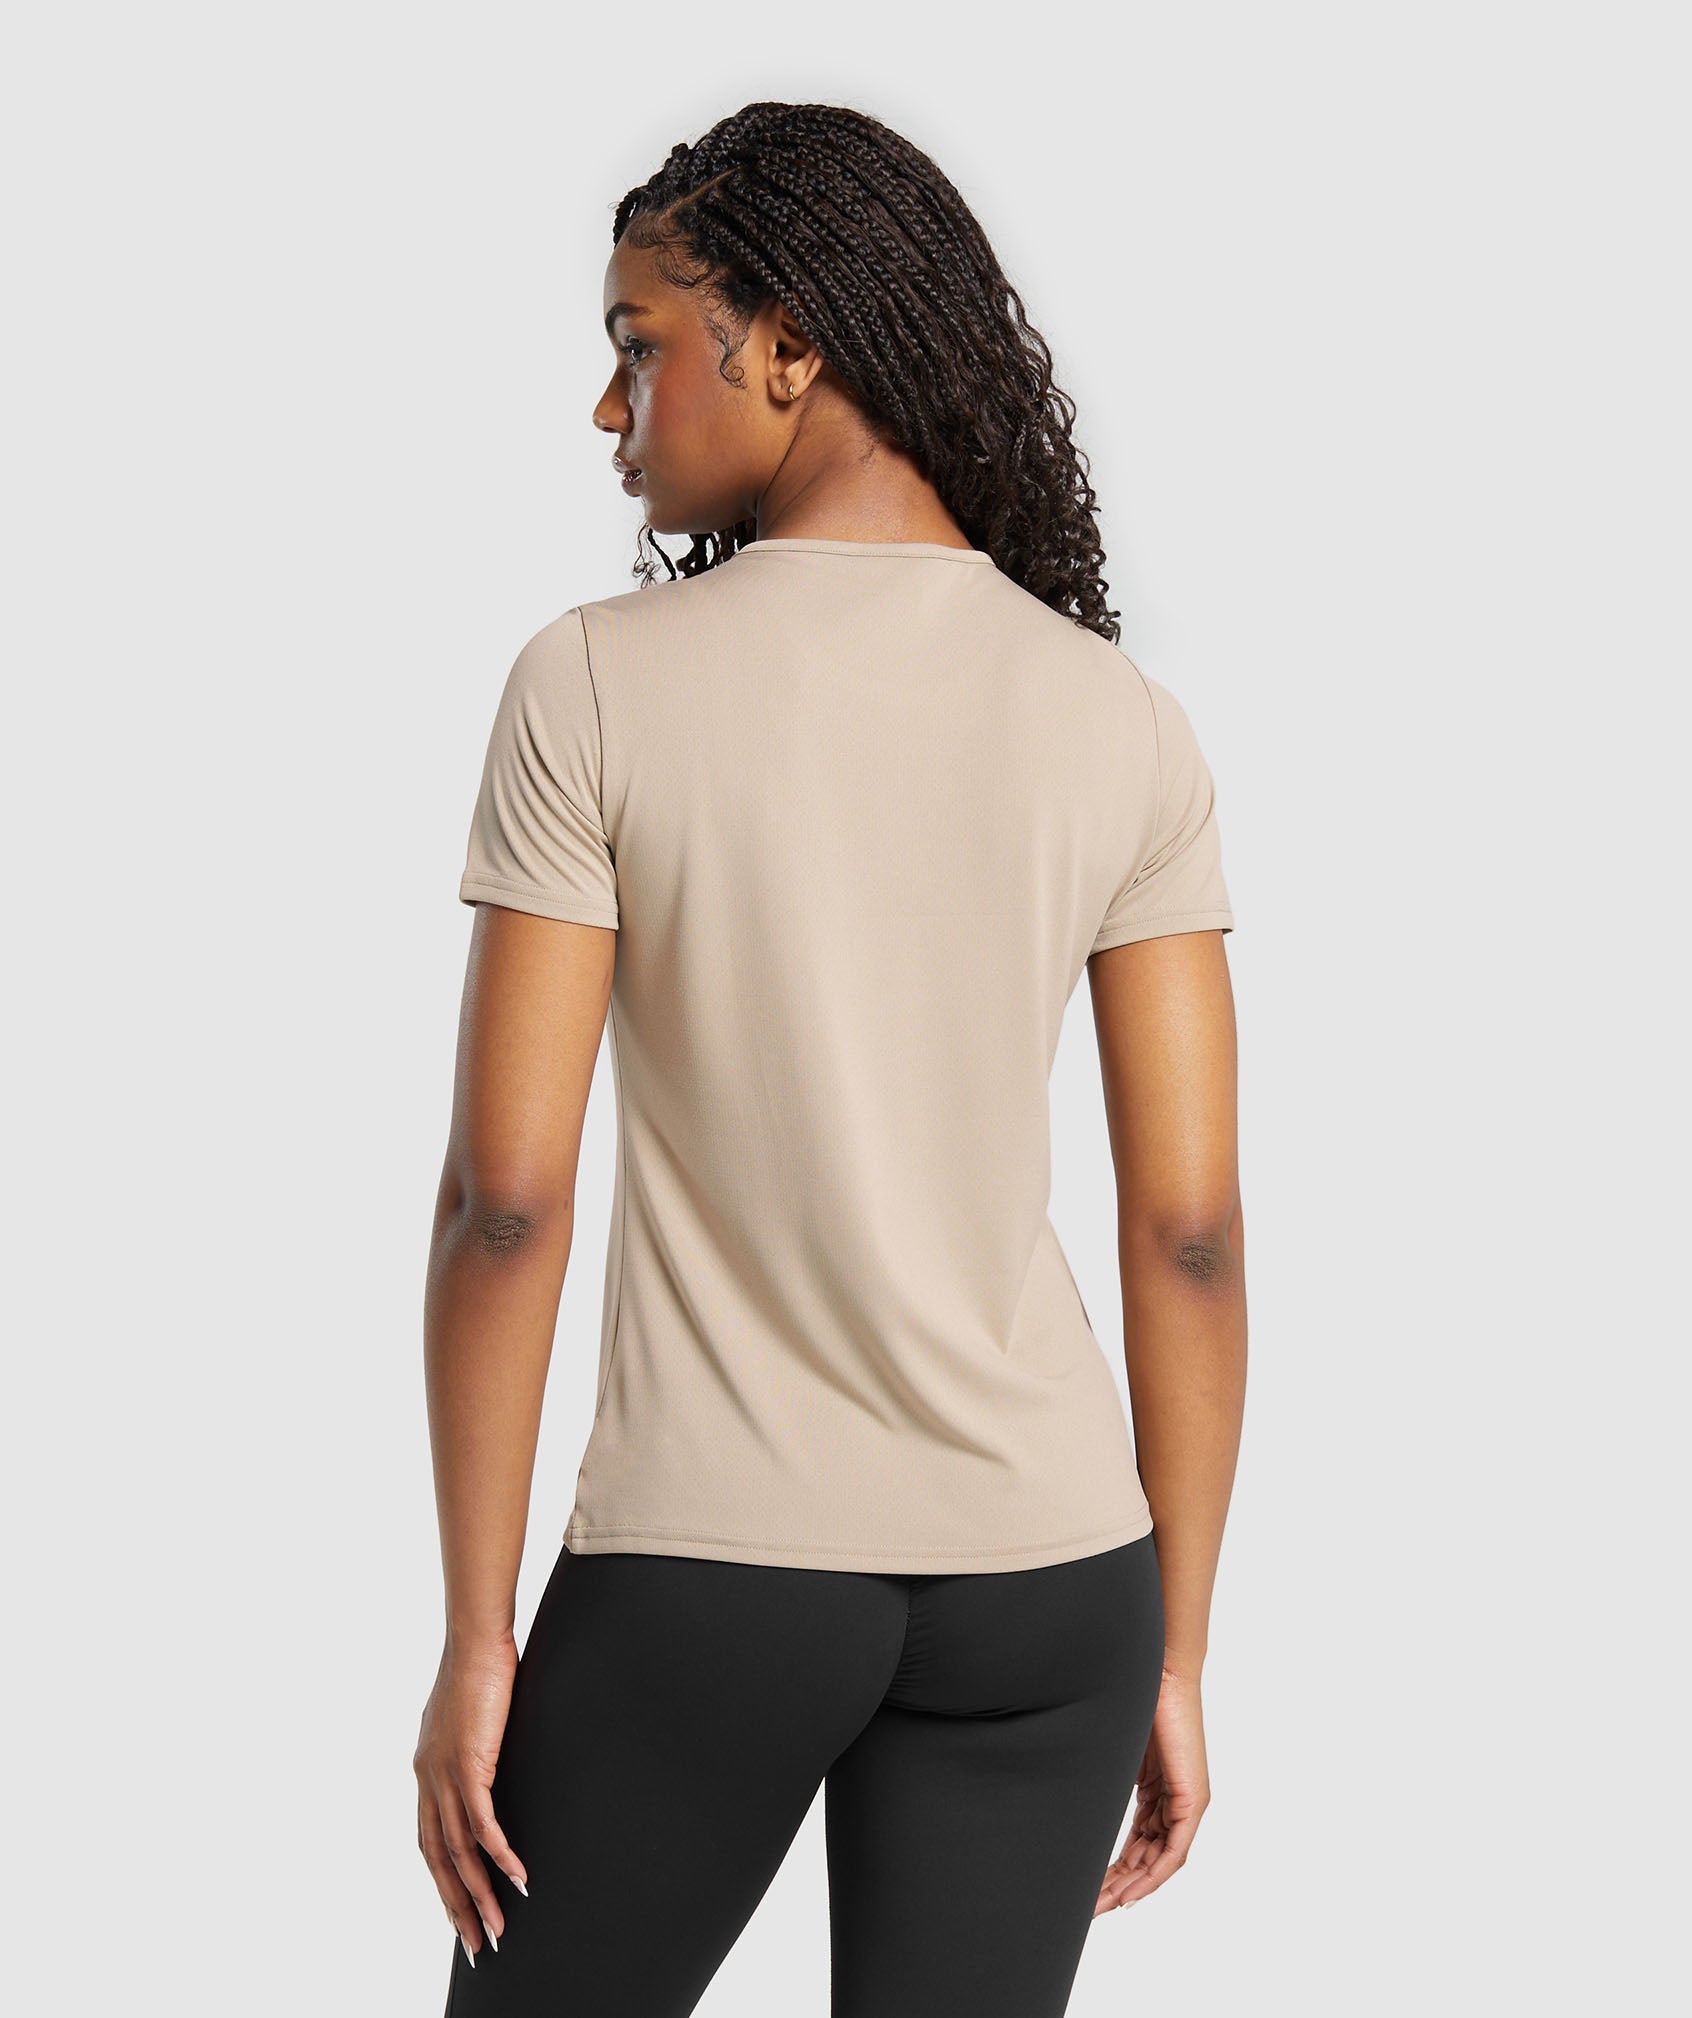 Training T-Shirt in Sand Brown - view 2